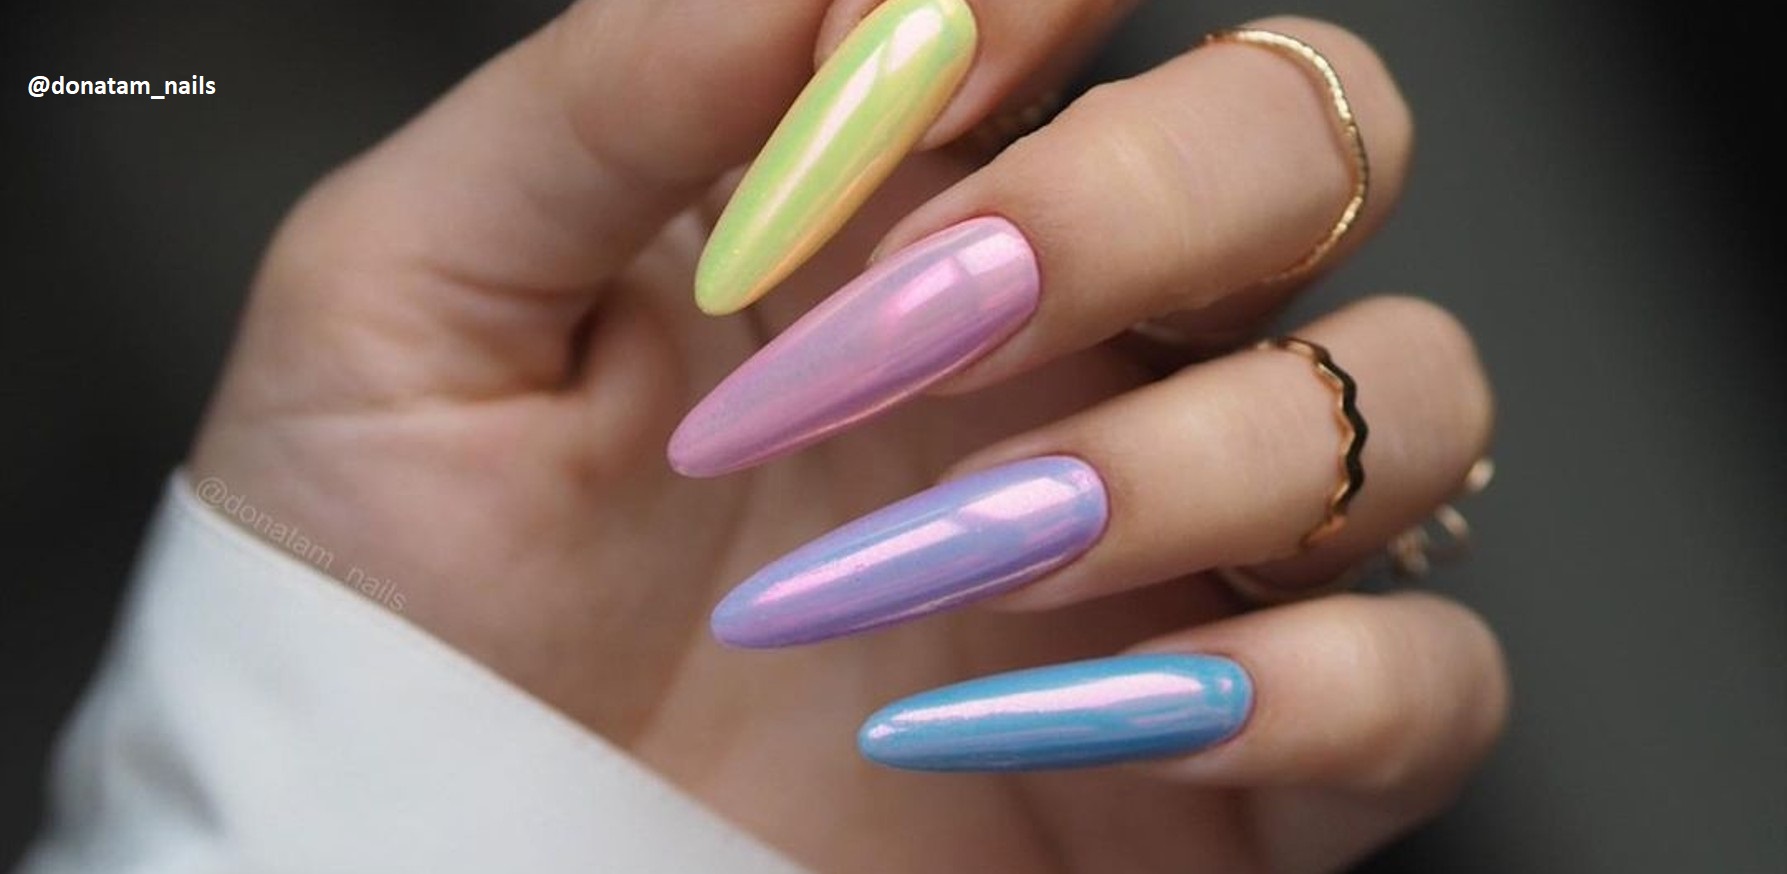 Slay Like Selena with Rainbow Nails that Will Steal the Show